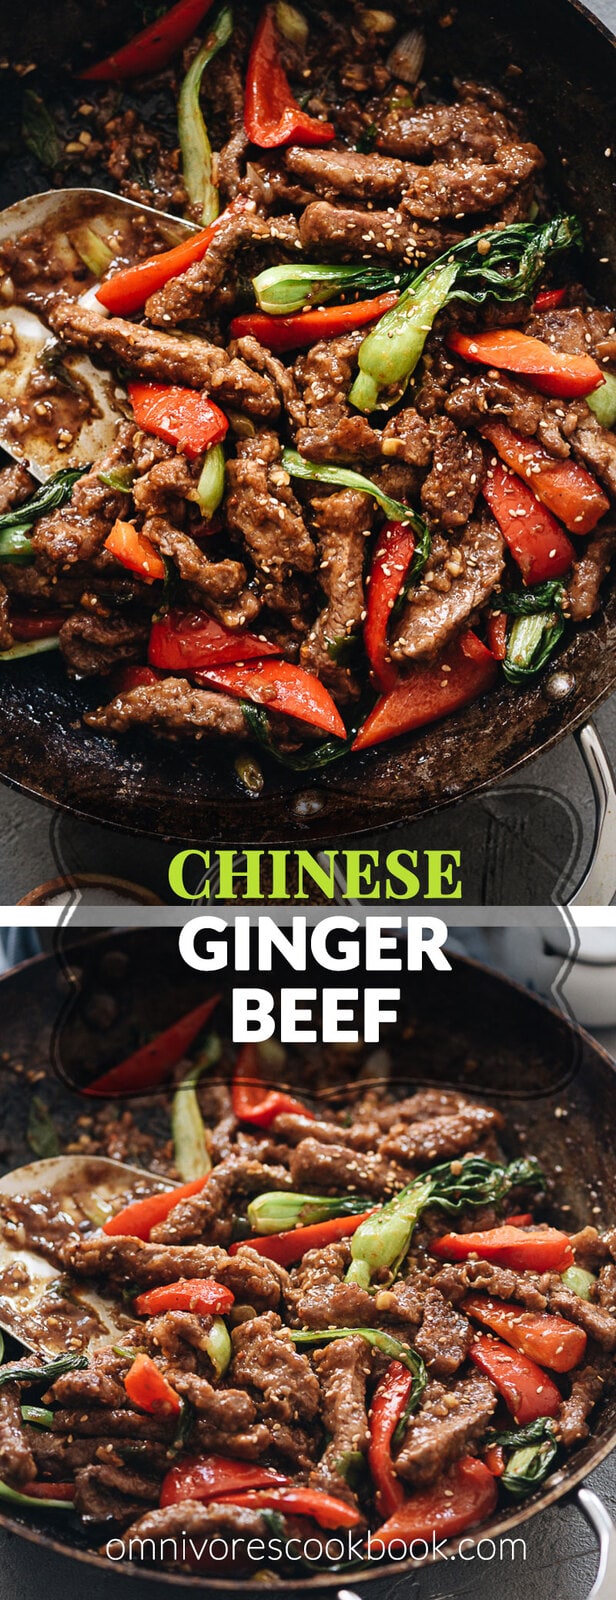 Ginger Beef | Crispy juicy beef, crunchy bell peppers, and tender baby bok choy are tossed in a rich sauce that is sweet, spicy, sour, and peppery. Pair this ginger beef stir fry with a bowl of rice to soak up the deep, arresting flavors of the sauce, and you’ll have a princely takeout favorite with ten times the taste! {Gluten-free adaptable}